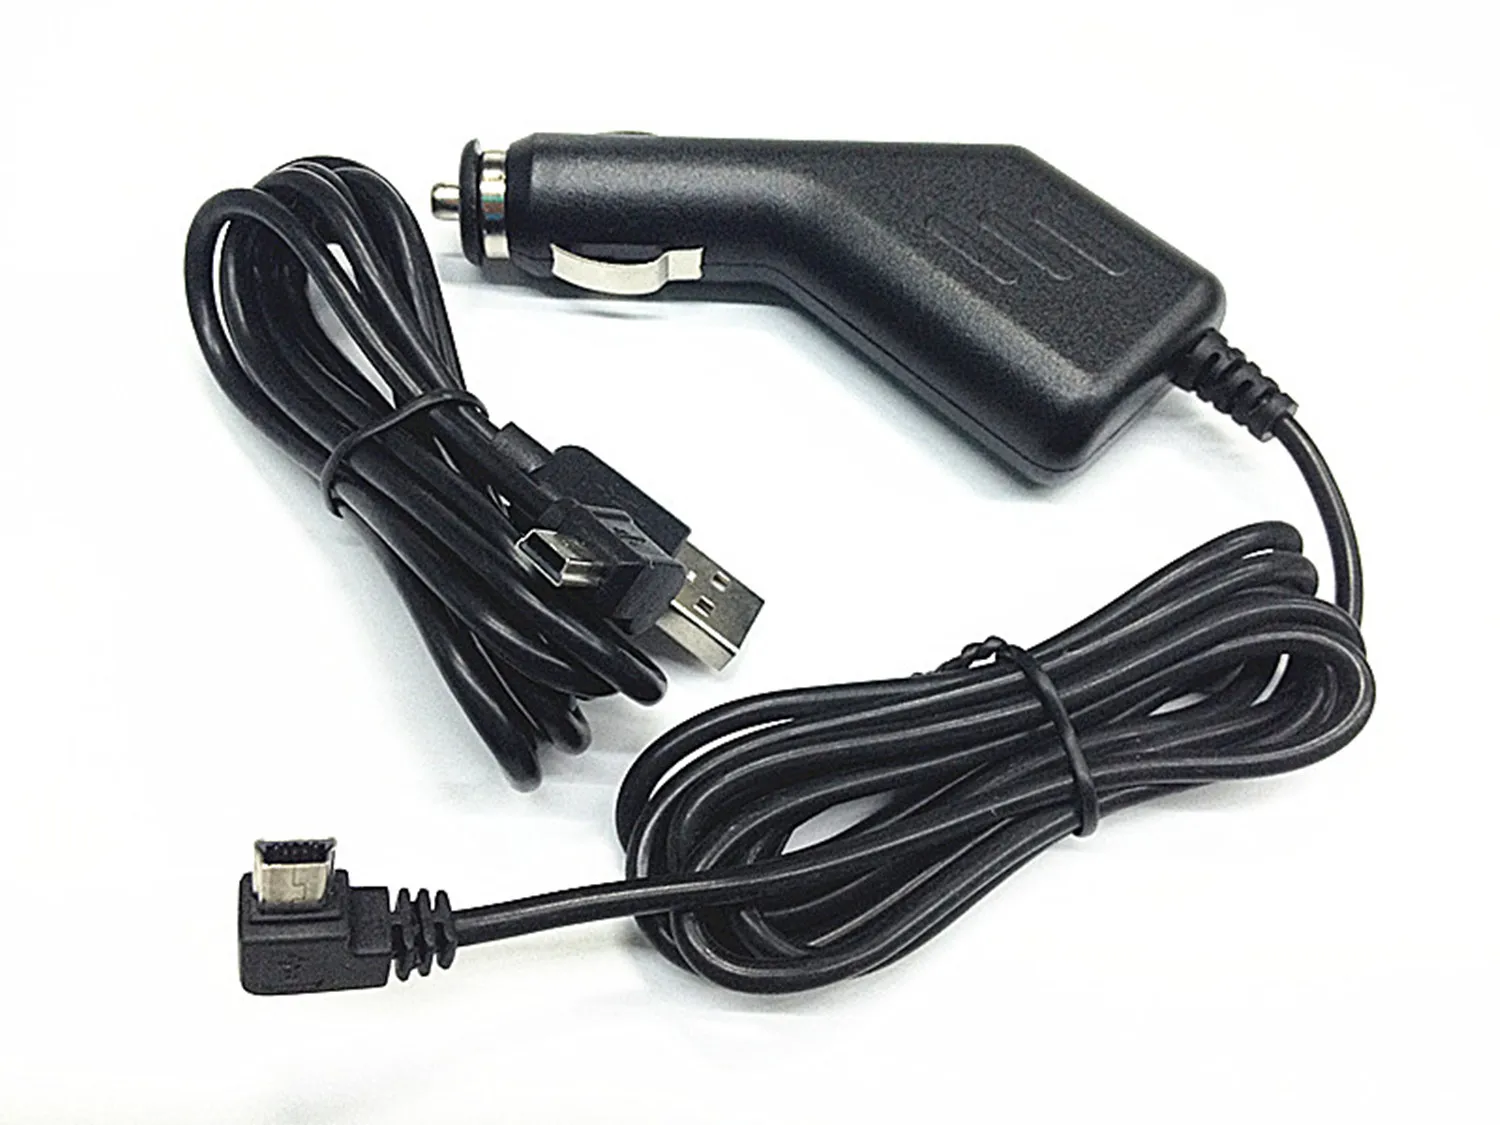 aankomst filosofie Reageren Car Power Adapter+usb Cable Cord | Garmin Gps Car Charger | Garmin Nuvi  Charger - 5v 2a - Aliexpress